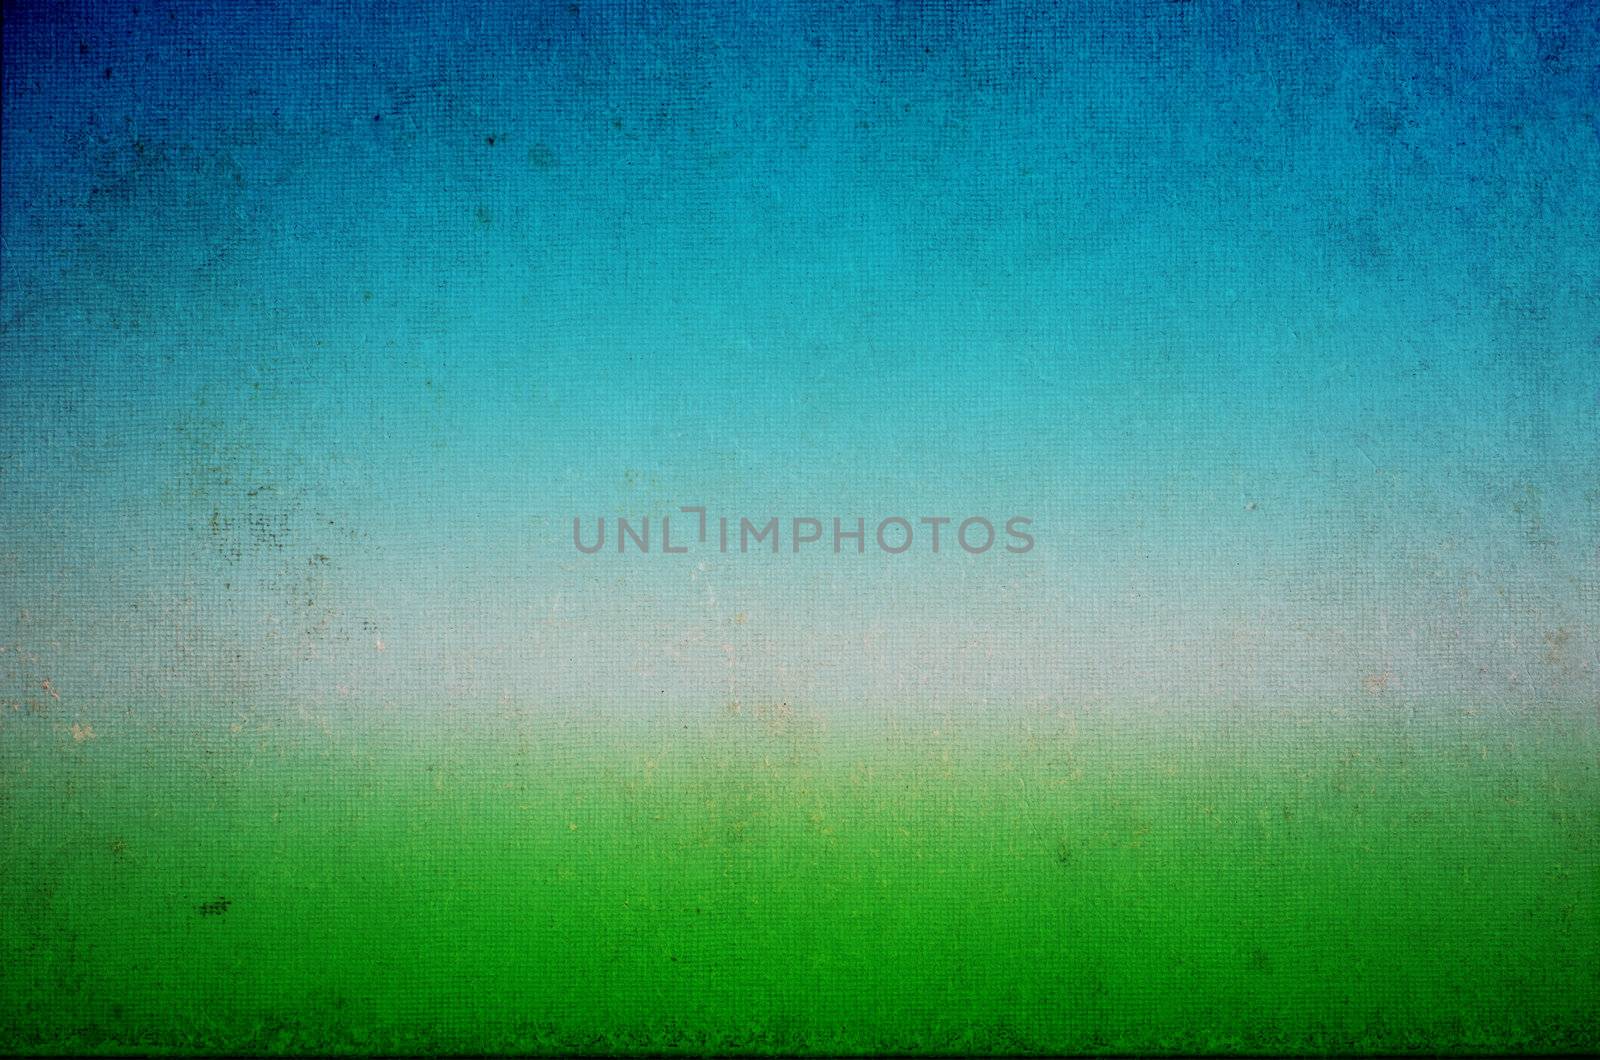 A grungy, grubby, stained and marked old  woven texture resembling a painted impressionistic grass and sky landscape.  Bright green in lower frame, rising to cyan and then blue at the top of frame.